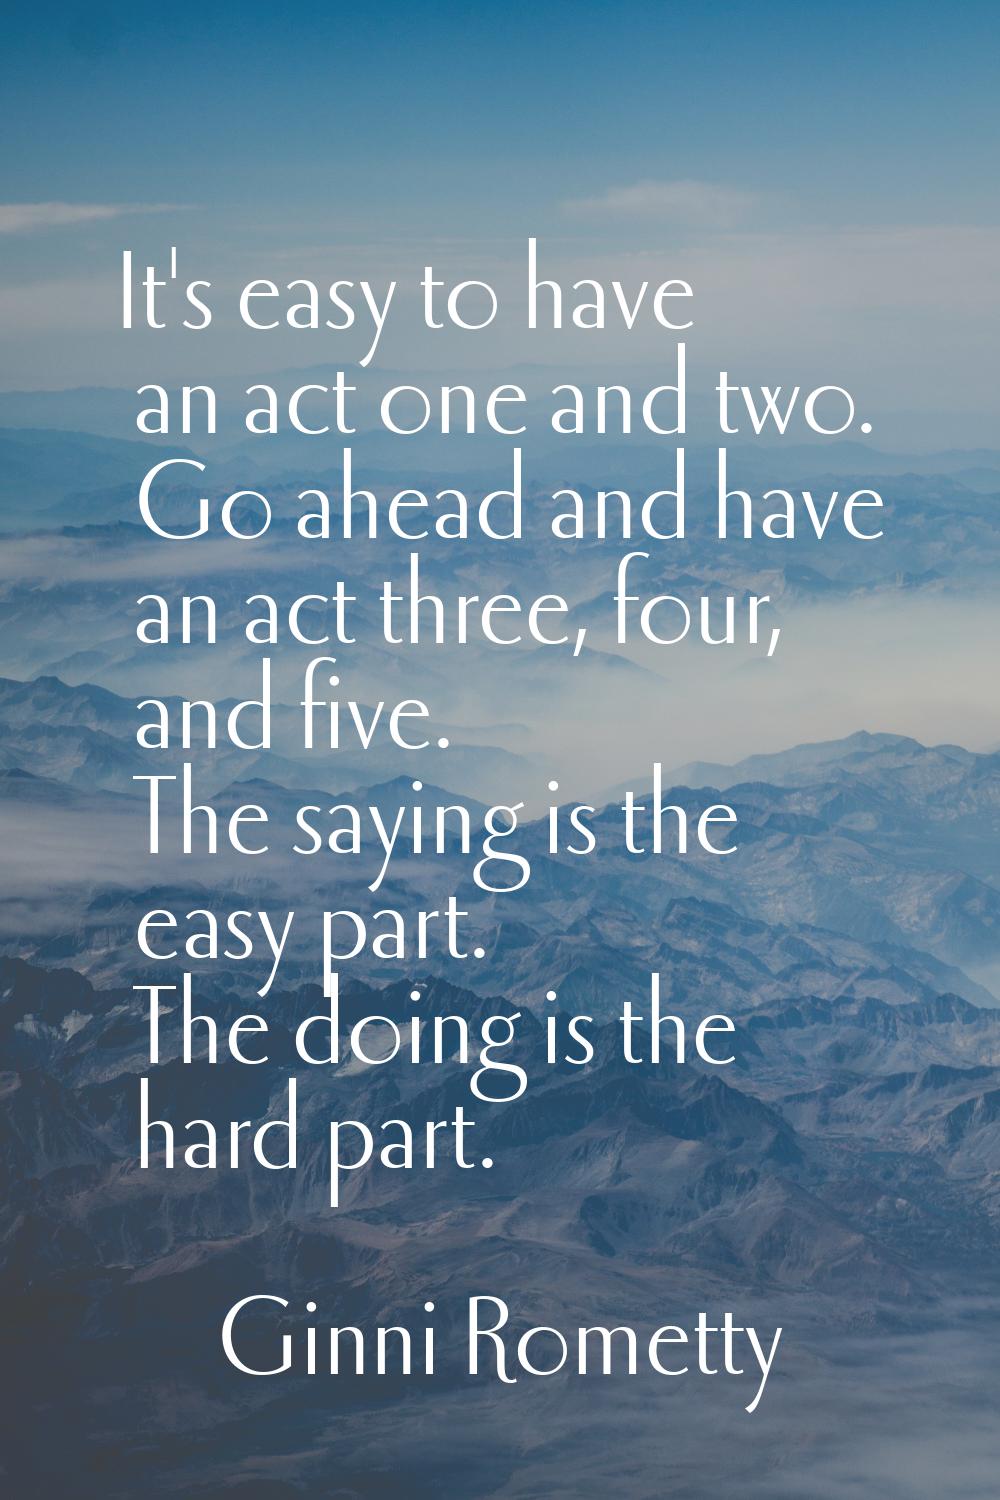 It's easy to have an act one and two. Go ahead and have an act three, four, and five. The saying is